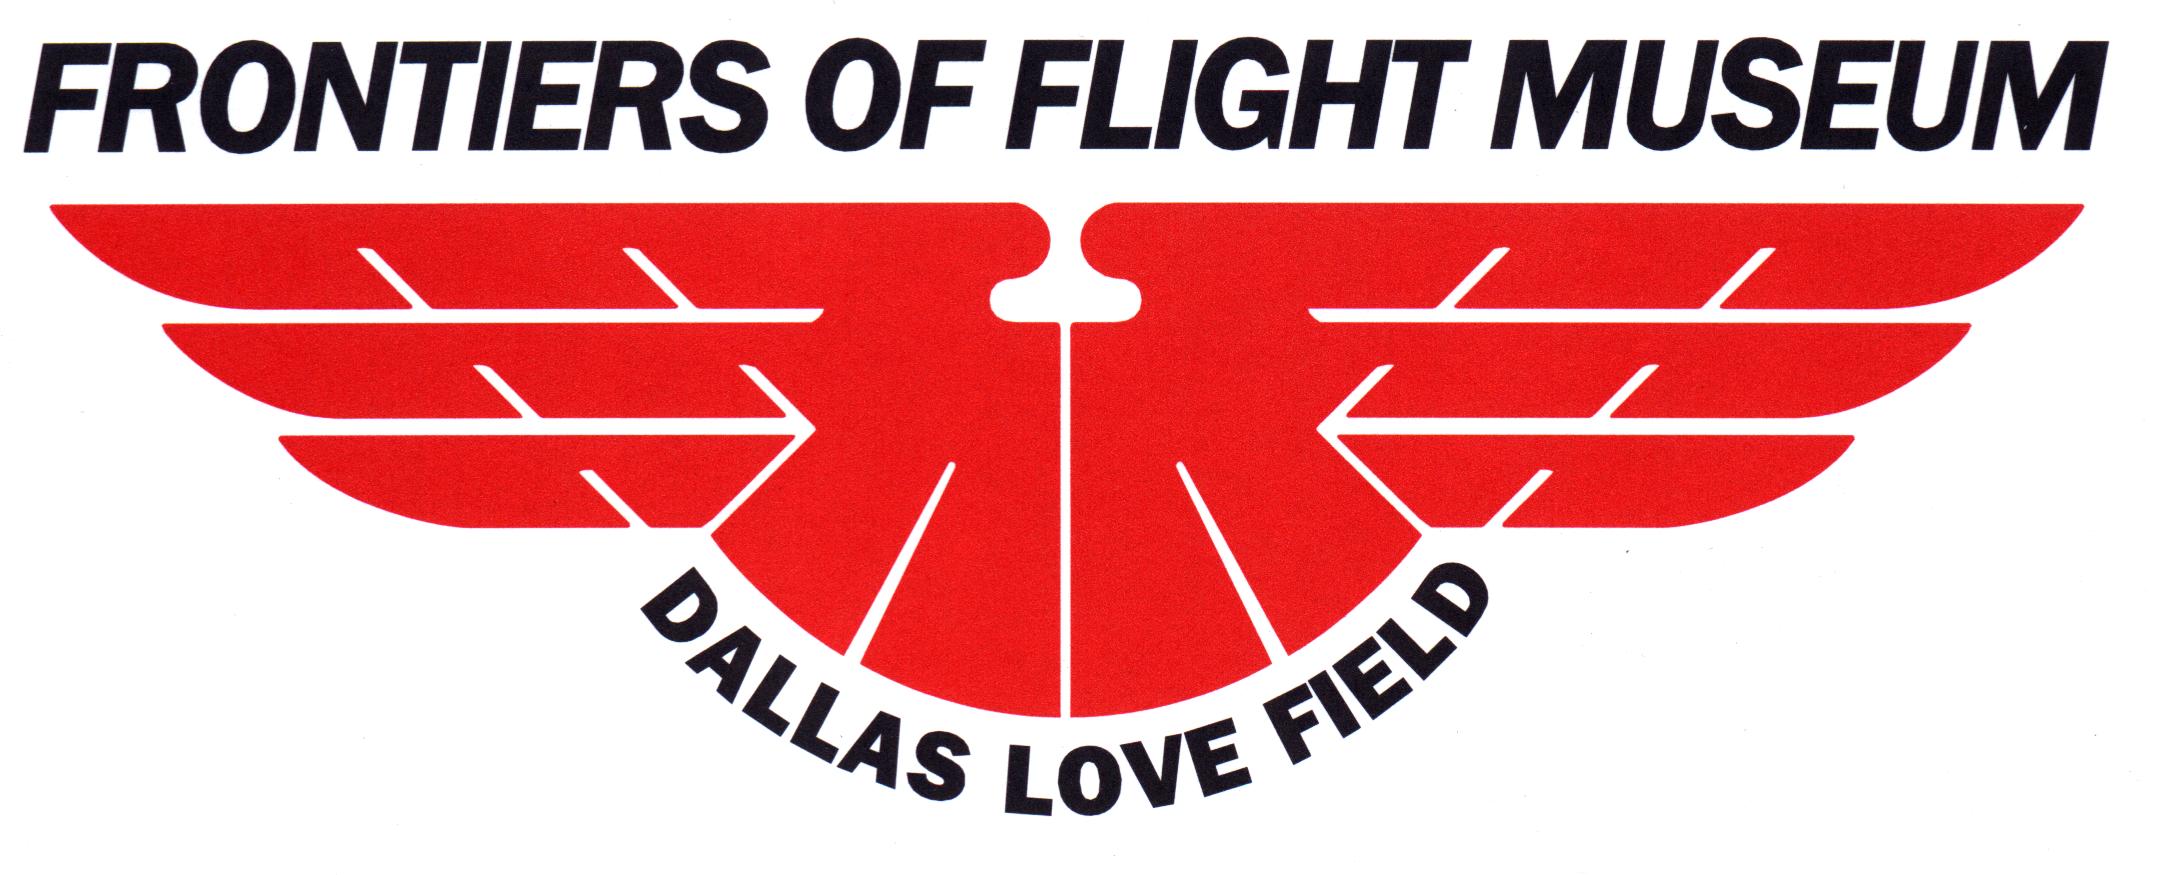 red wings logo with Frontiers of Flight Museum black text above and Dallas Love Field black text below